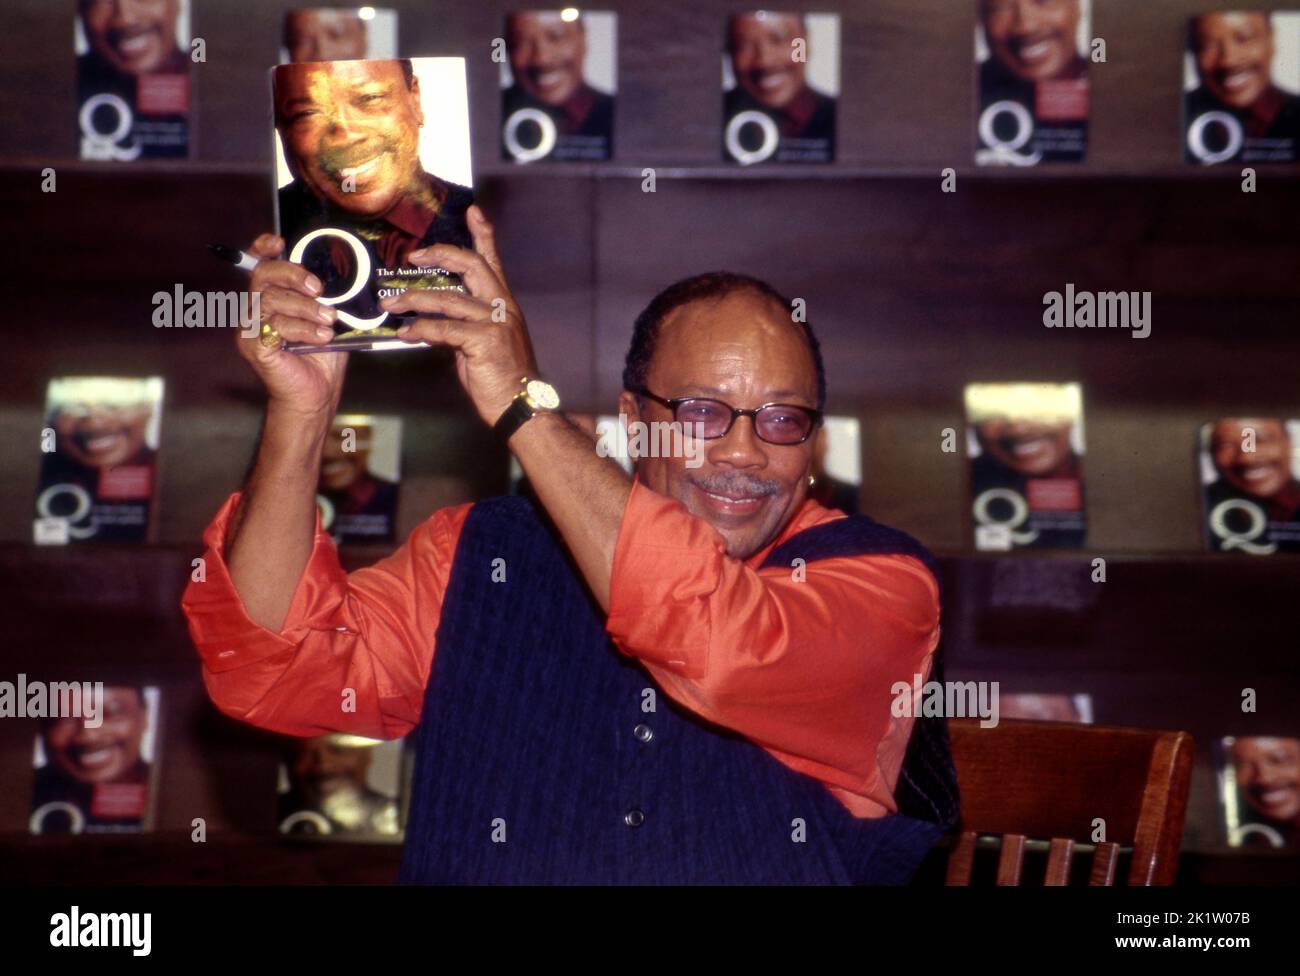 Quincy Jones at book signing event, West Hollywood, CA Stock Photo